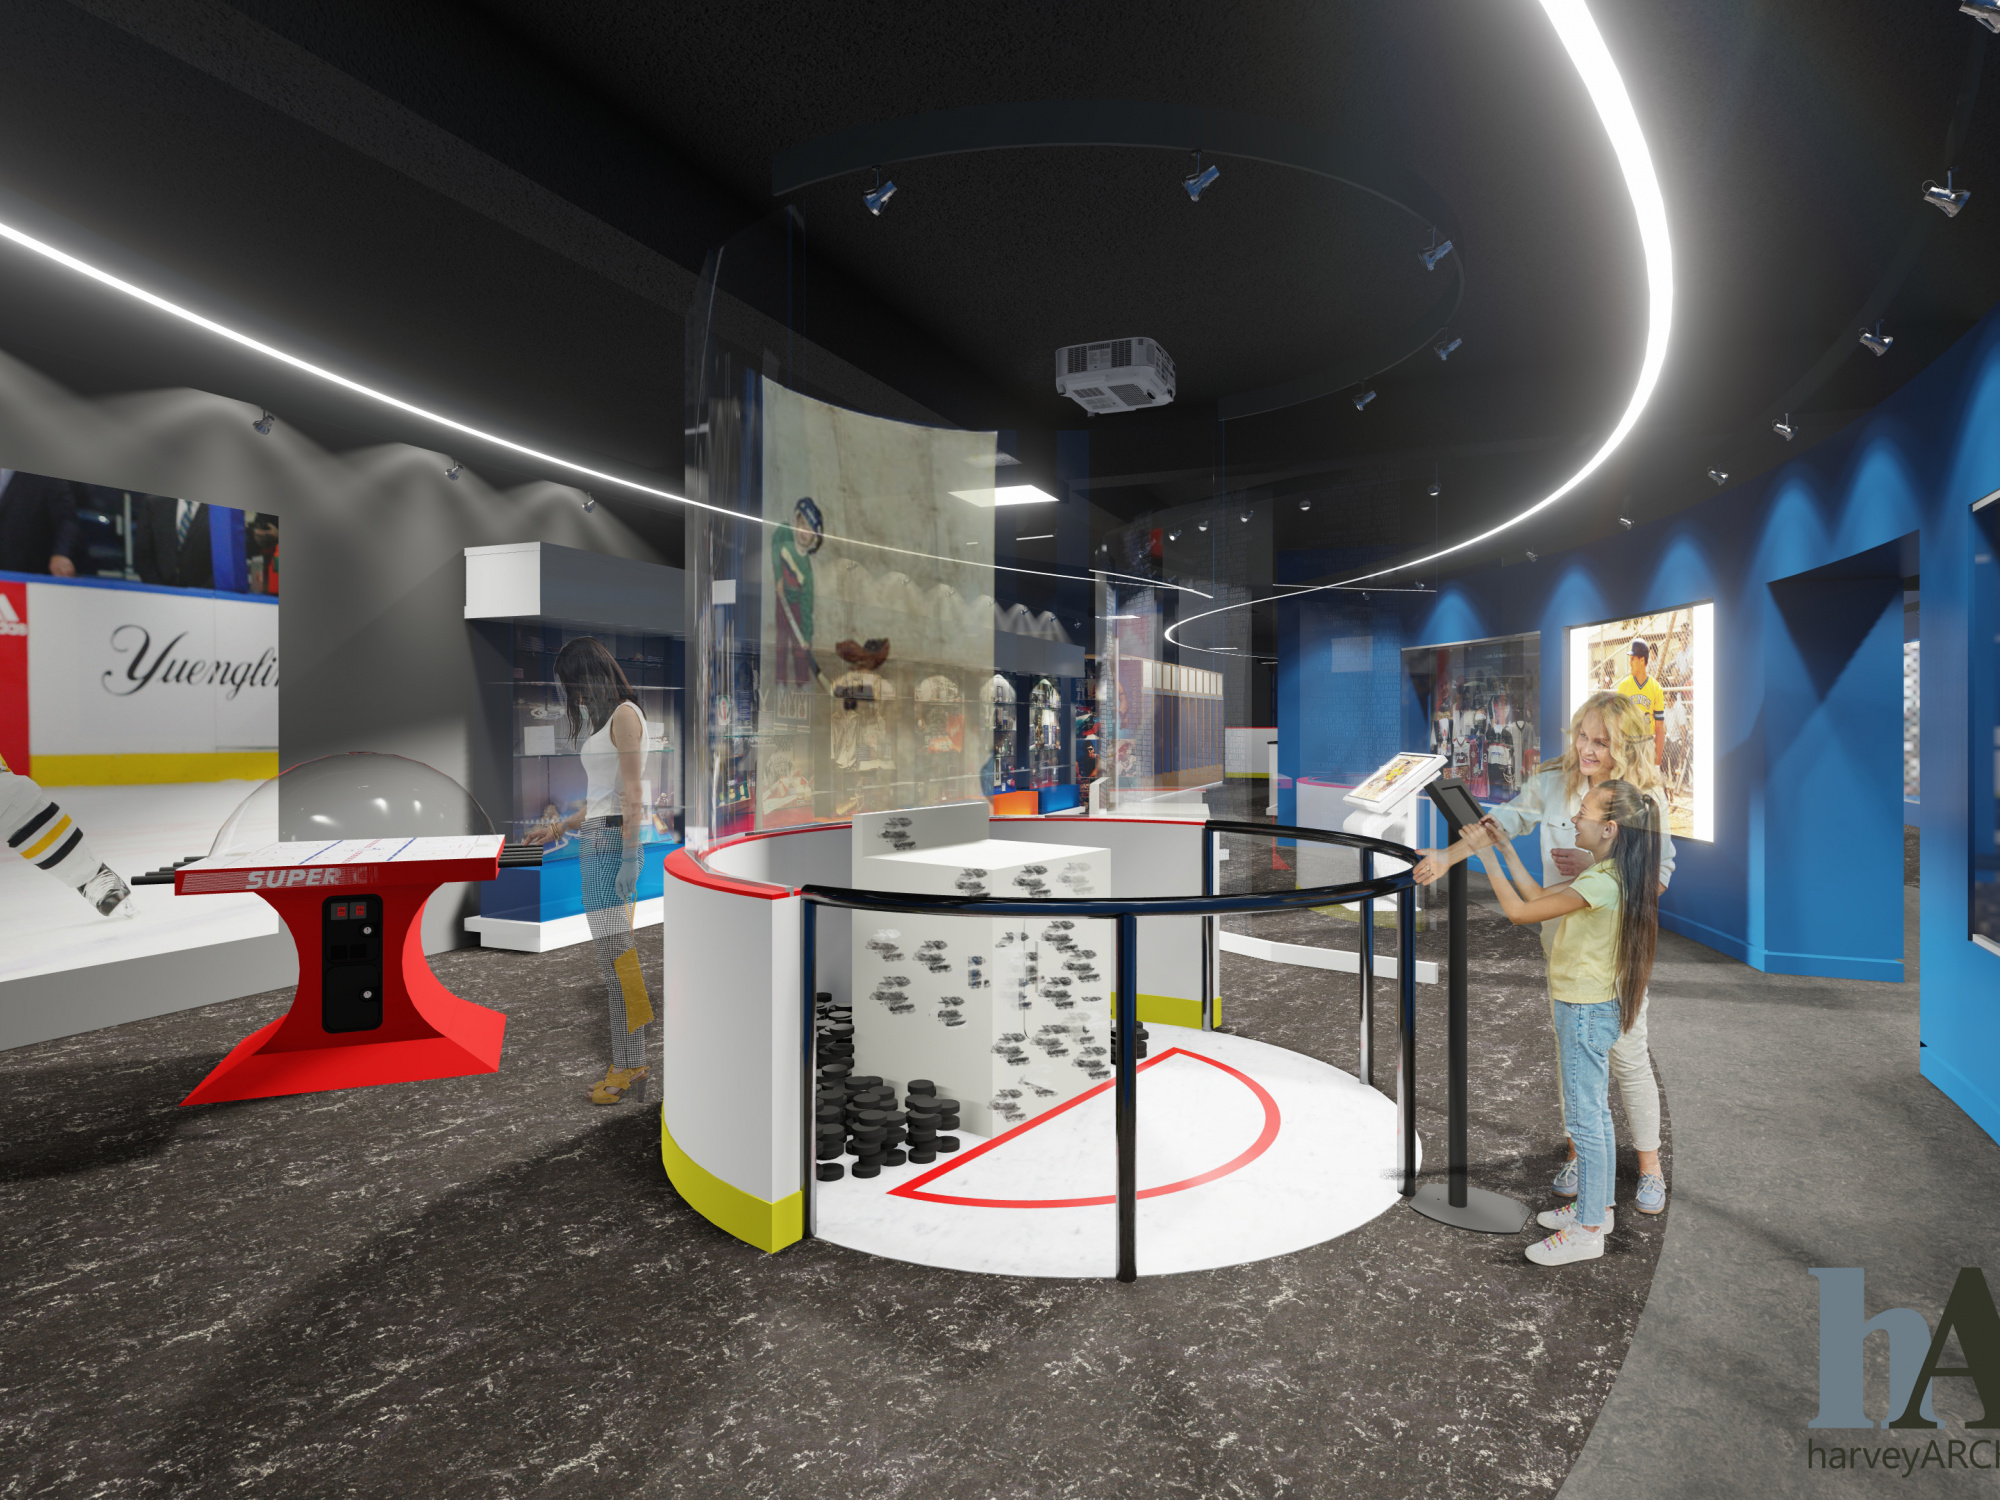 Rendering of the Sidney Crosby exhibit at the Nova Scotia Sport Hall of Fame